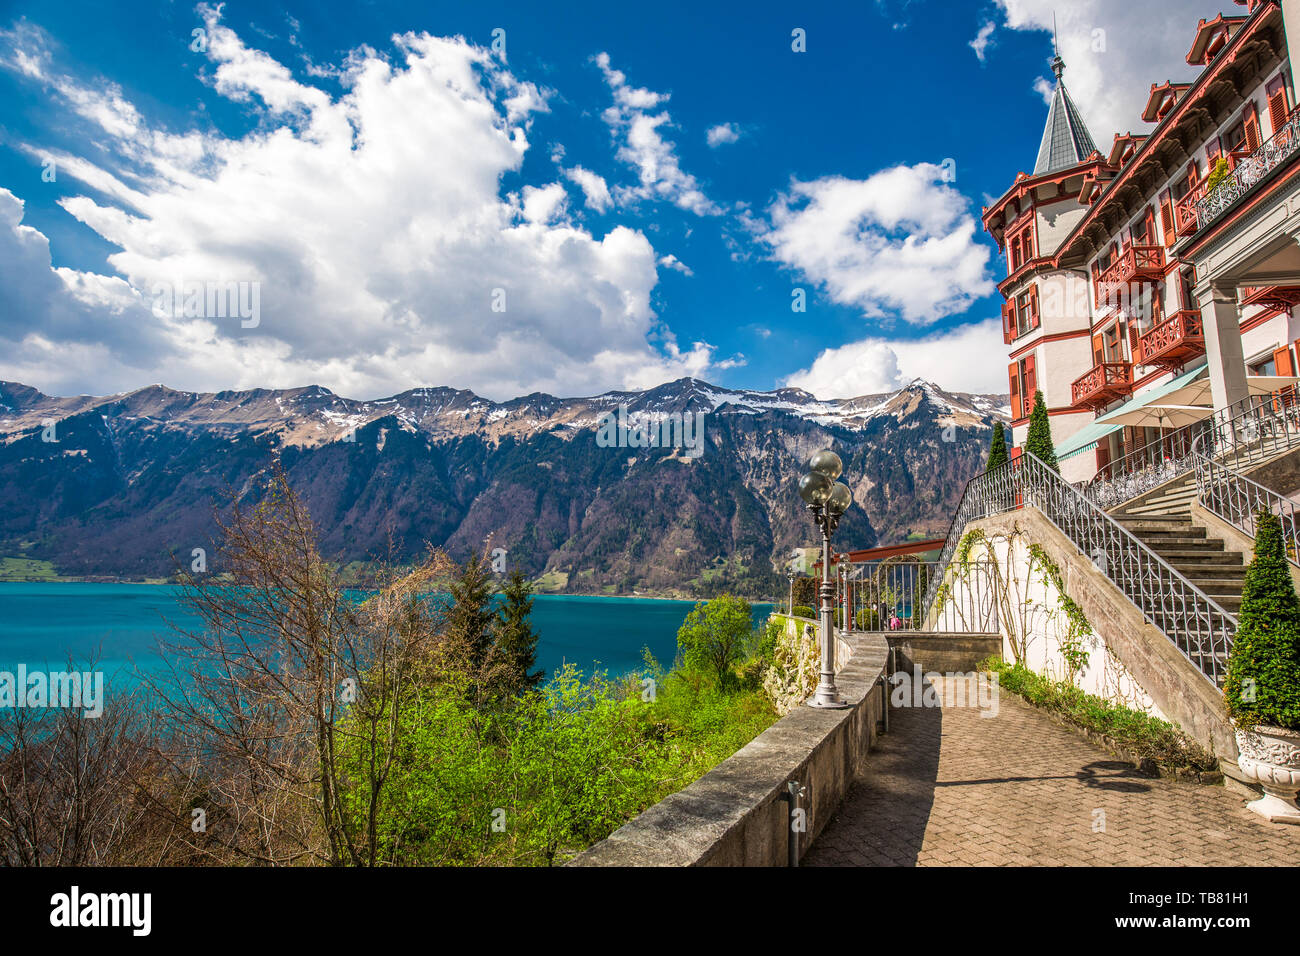 BRIENZ, April 21, 2019 - Lake Brienz with Giessbach waterfall by Interlaken with the Swiss Alps covered by snow in the background, Switzerland, Europe Stock Photo